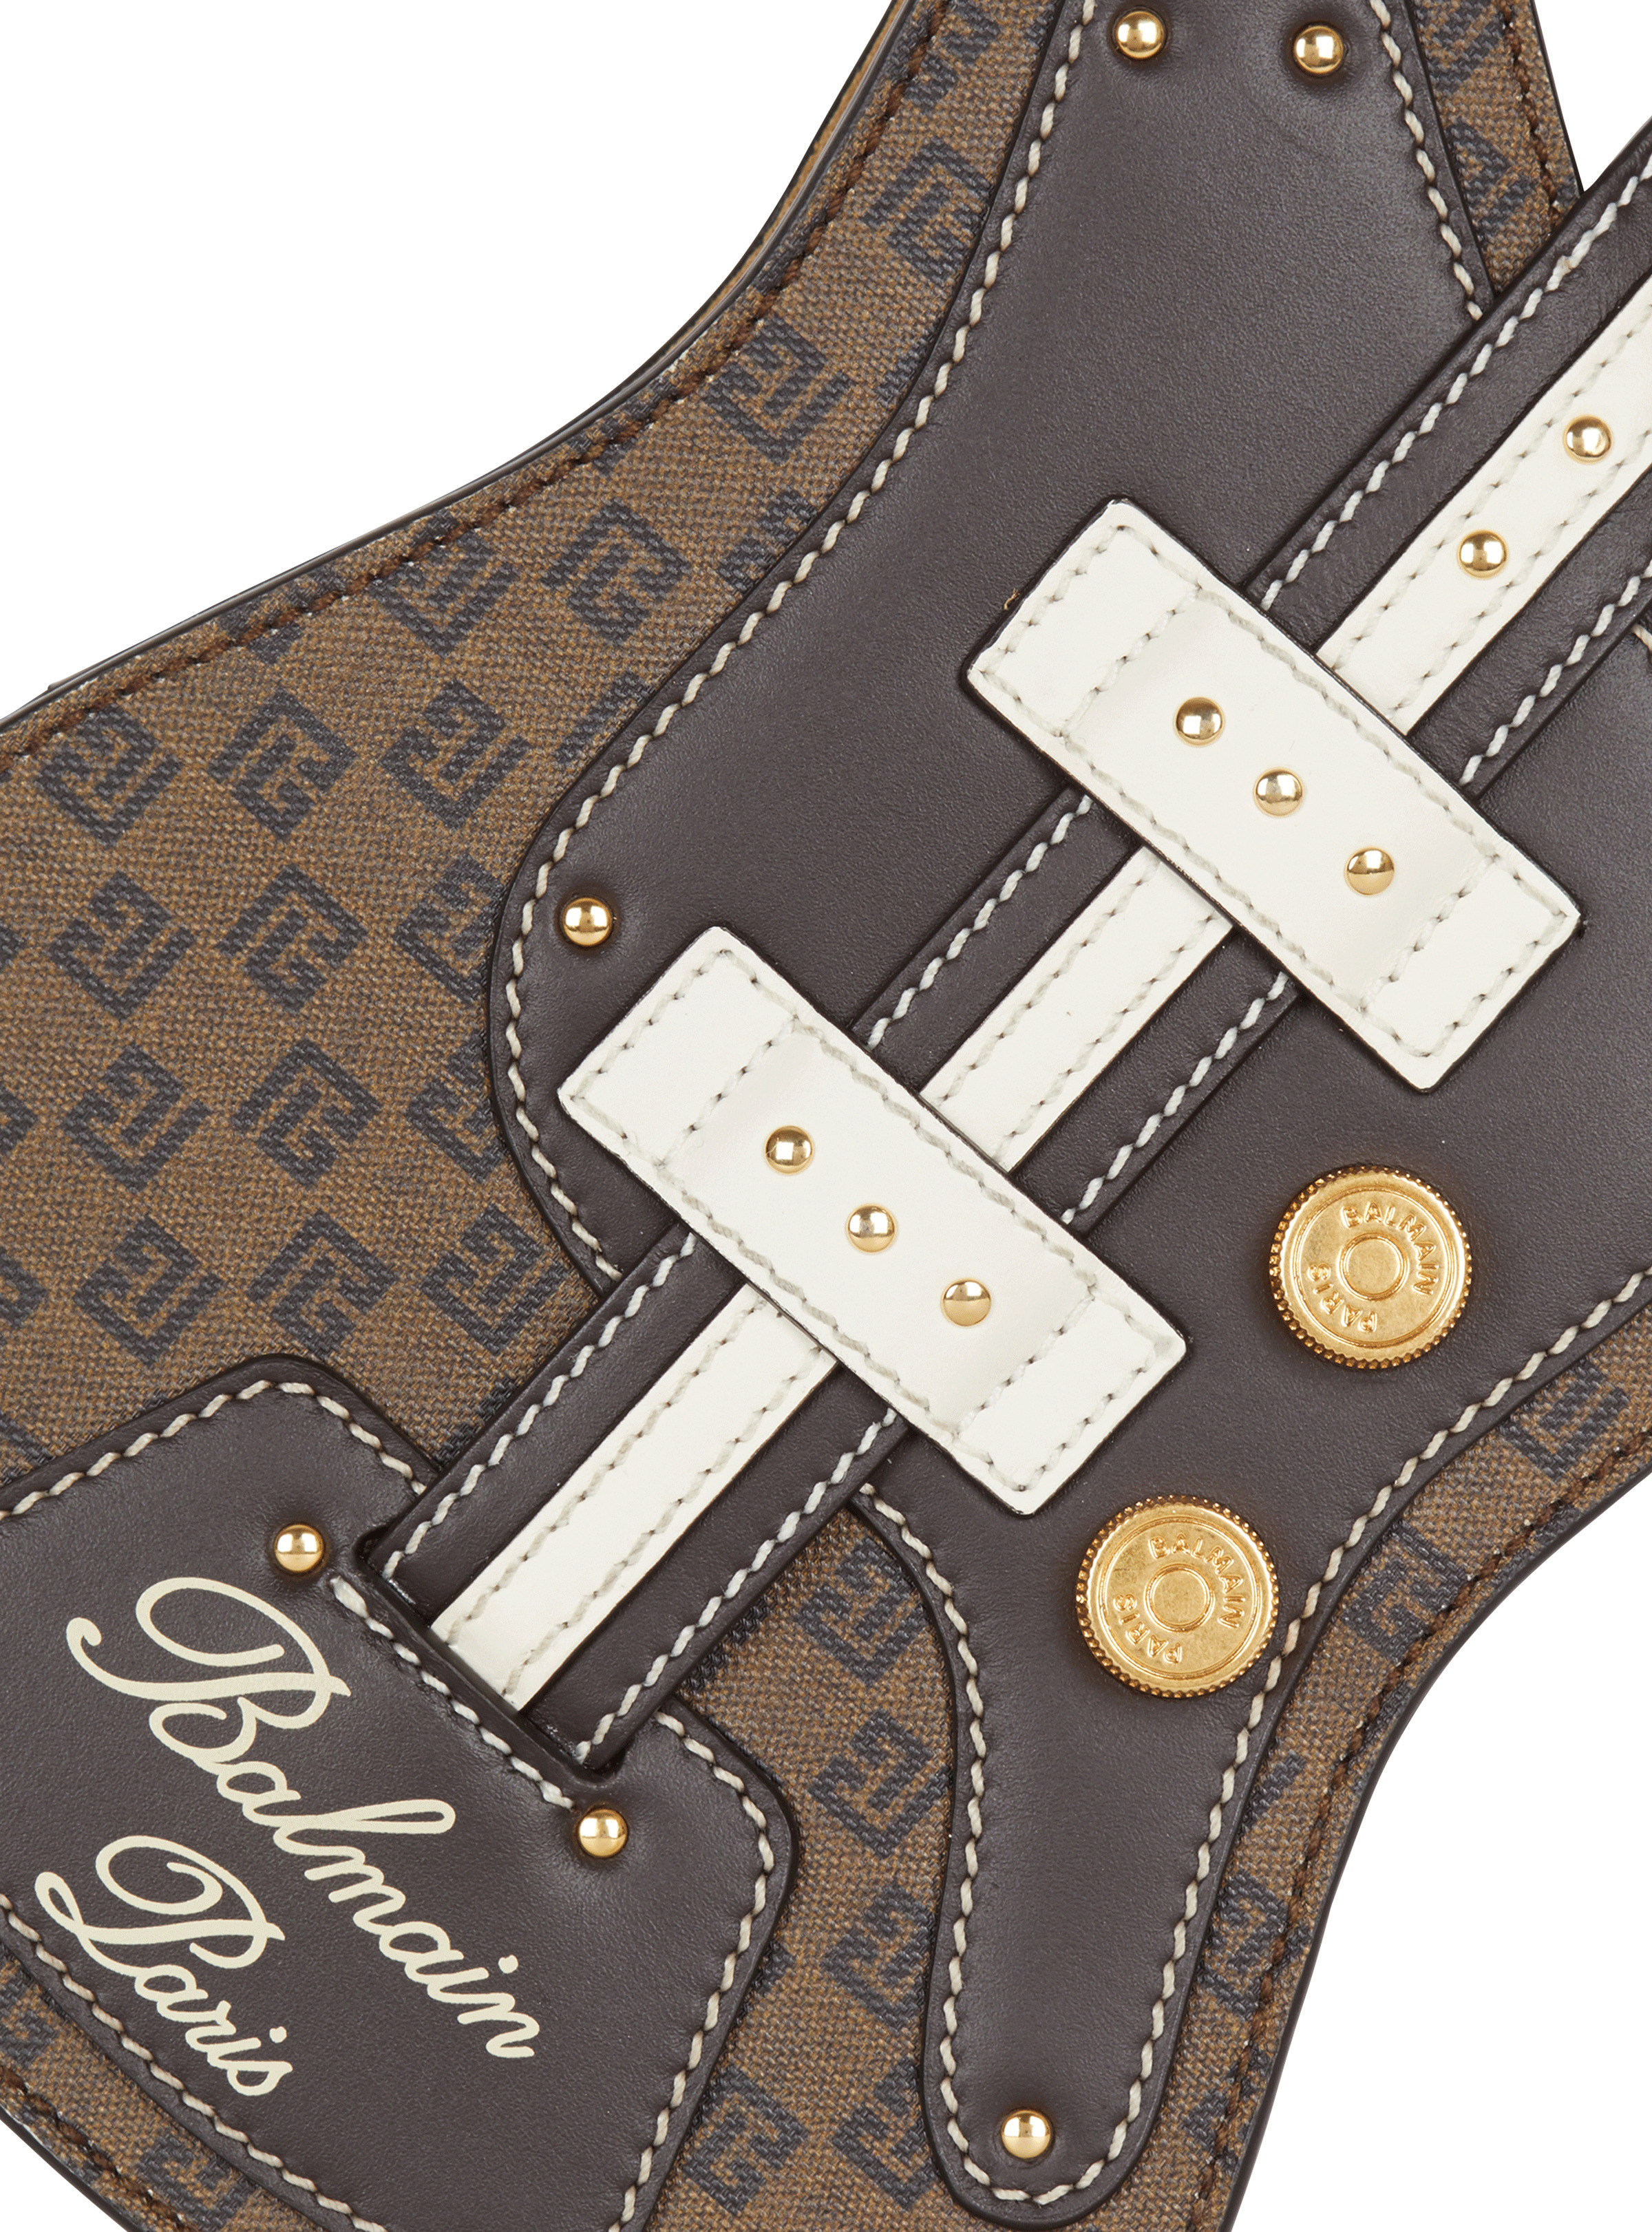 Guitar Bag clutch with leather and monogram detailing - 6